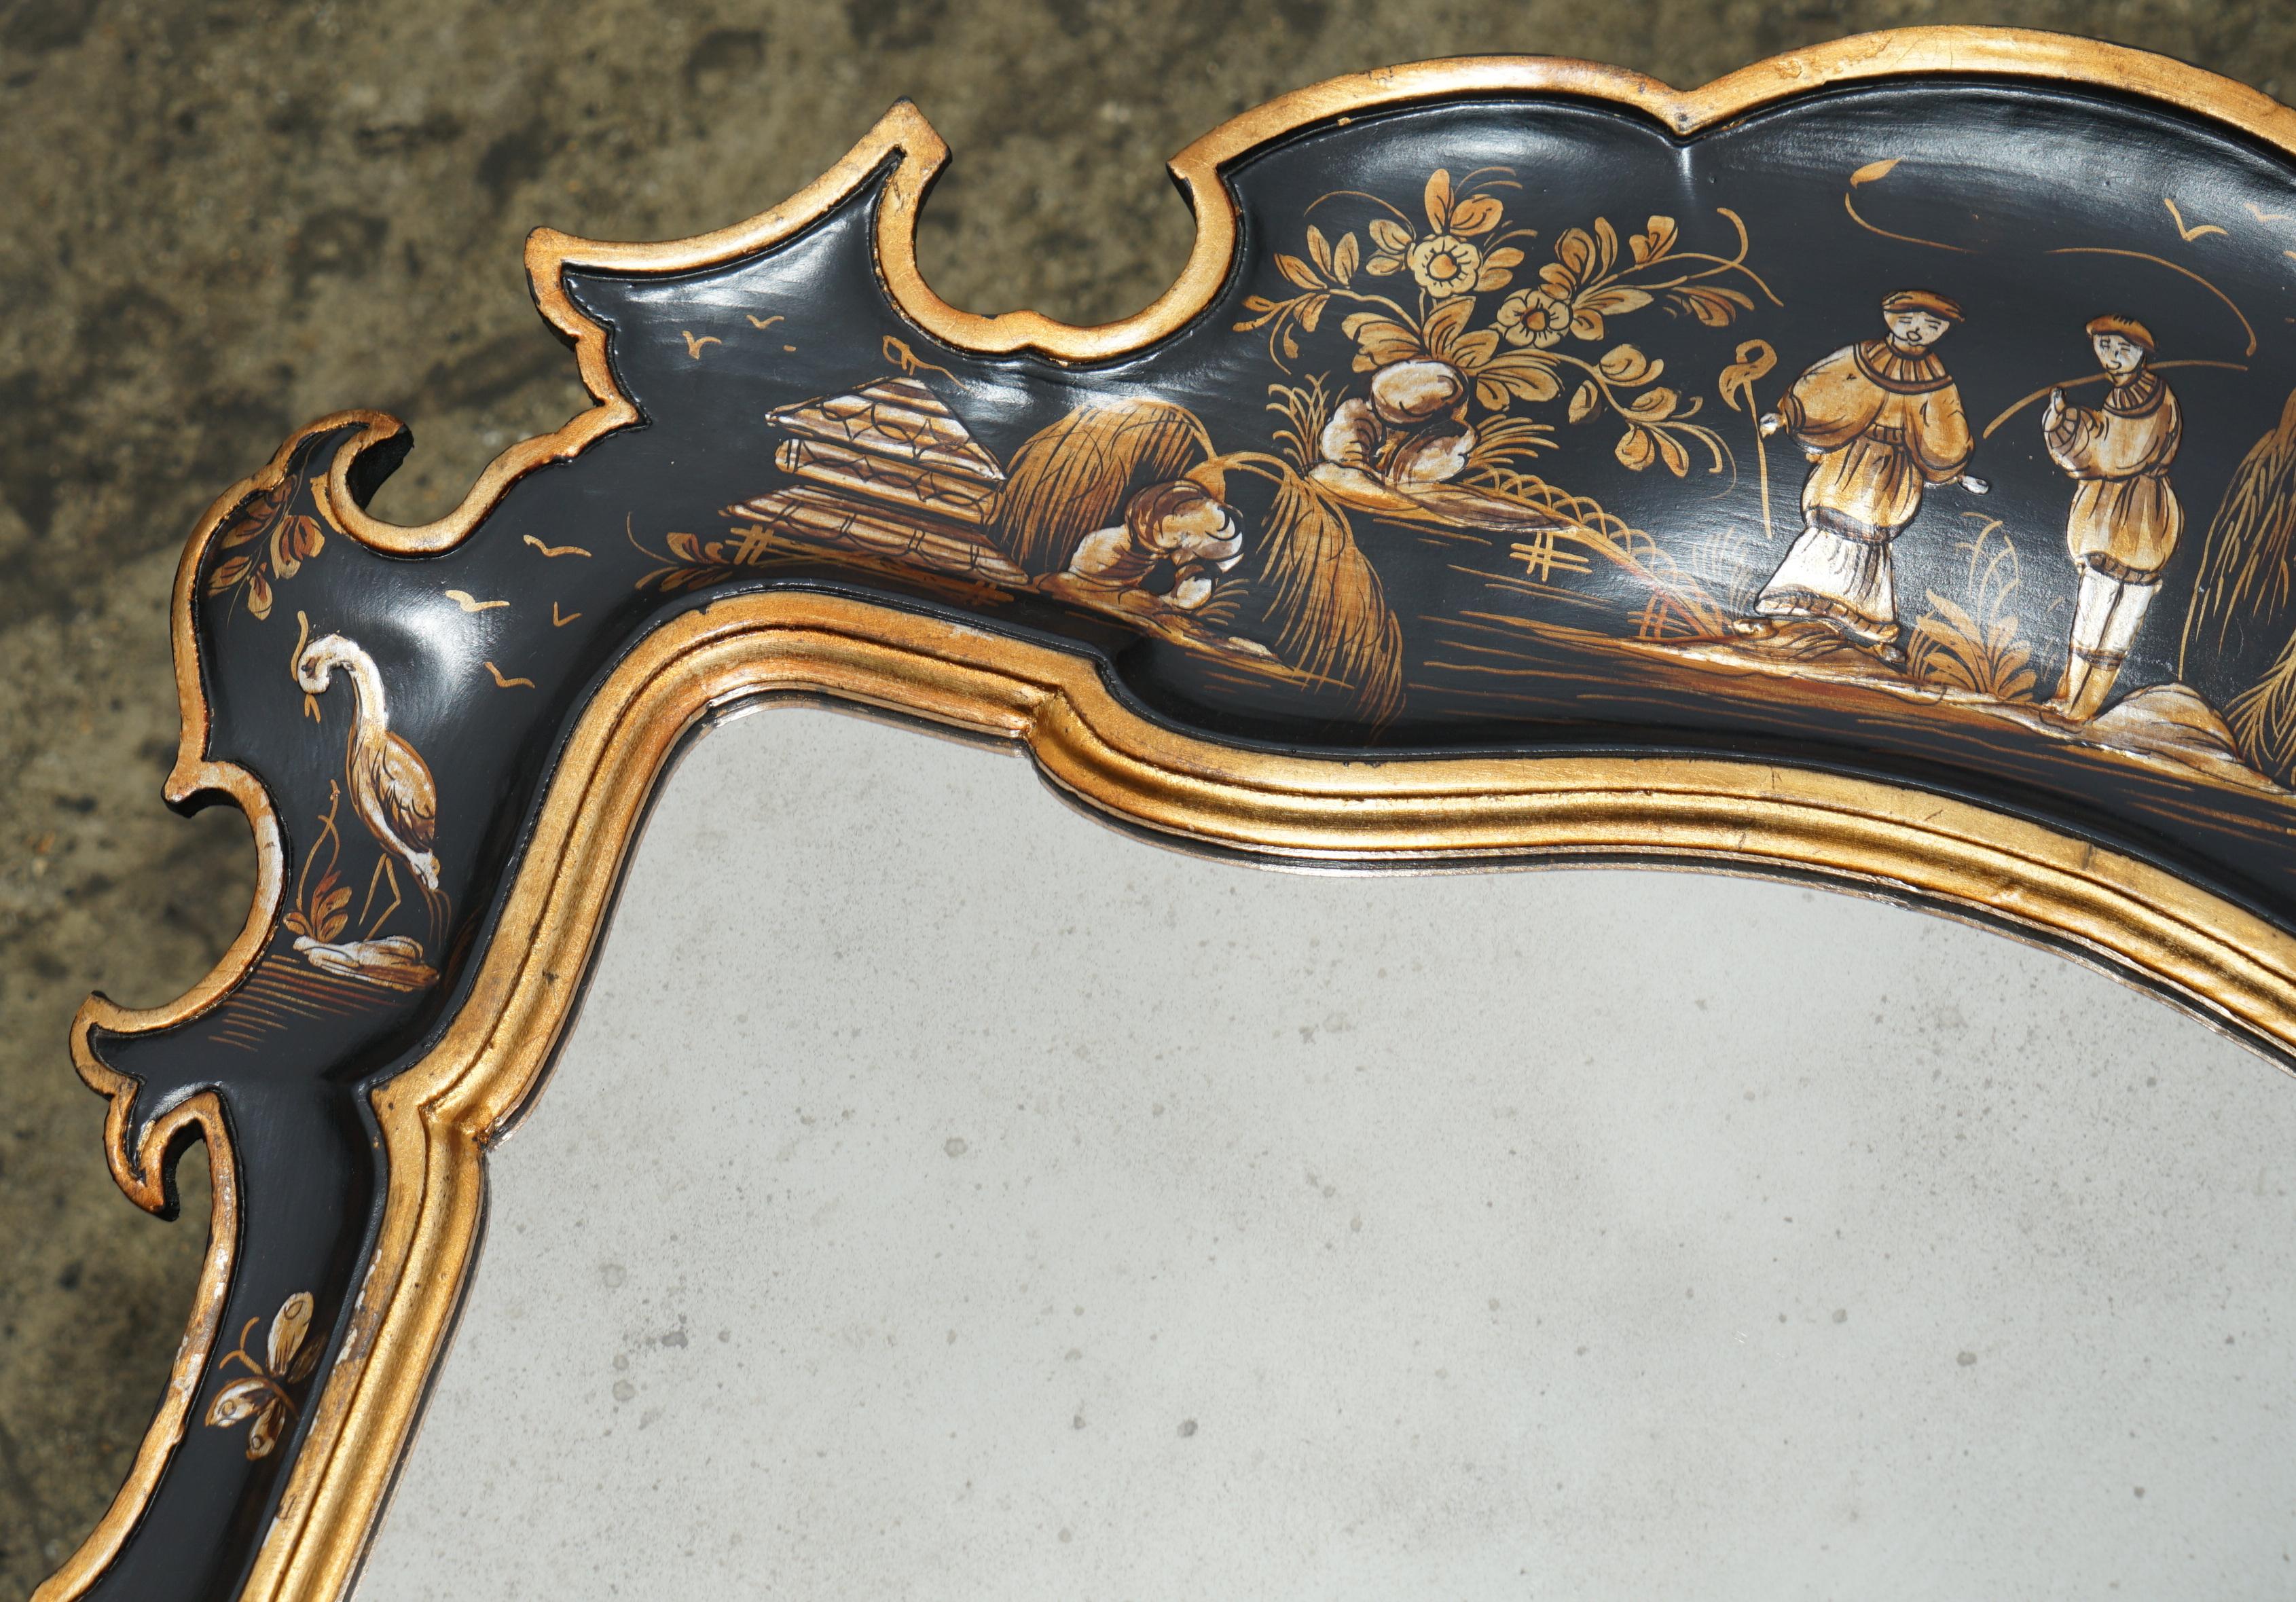 1.4 METER CHINESE CHINOISERIE MiRROR ORNATE HAND PAINTINGS STAMPED MADE IN ITALY For Sale 4